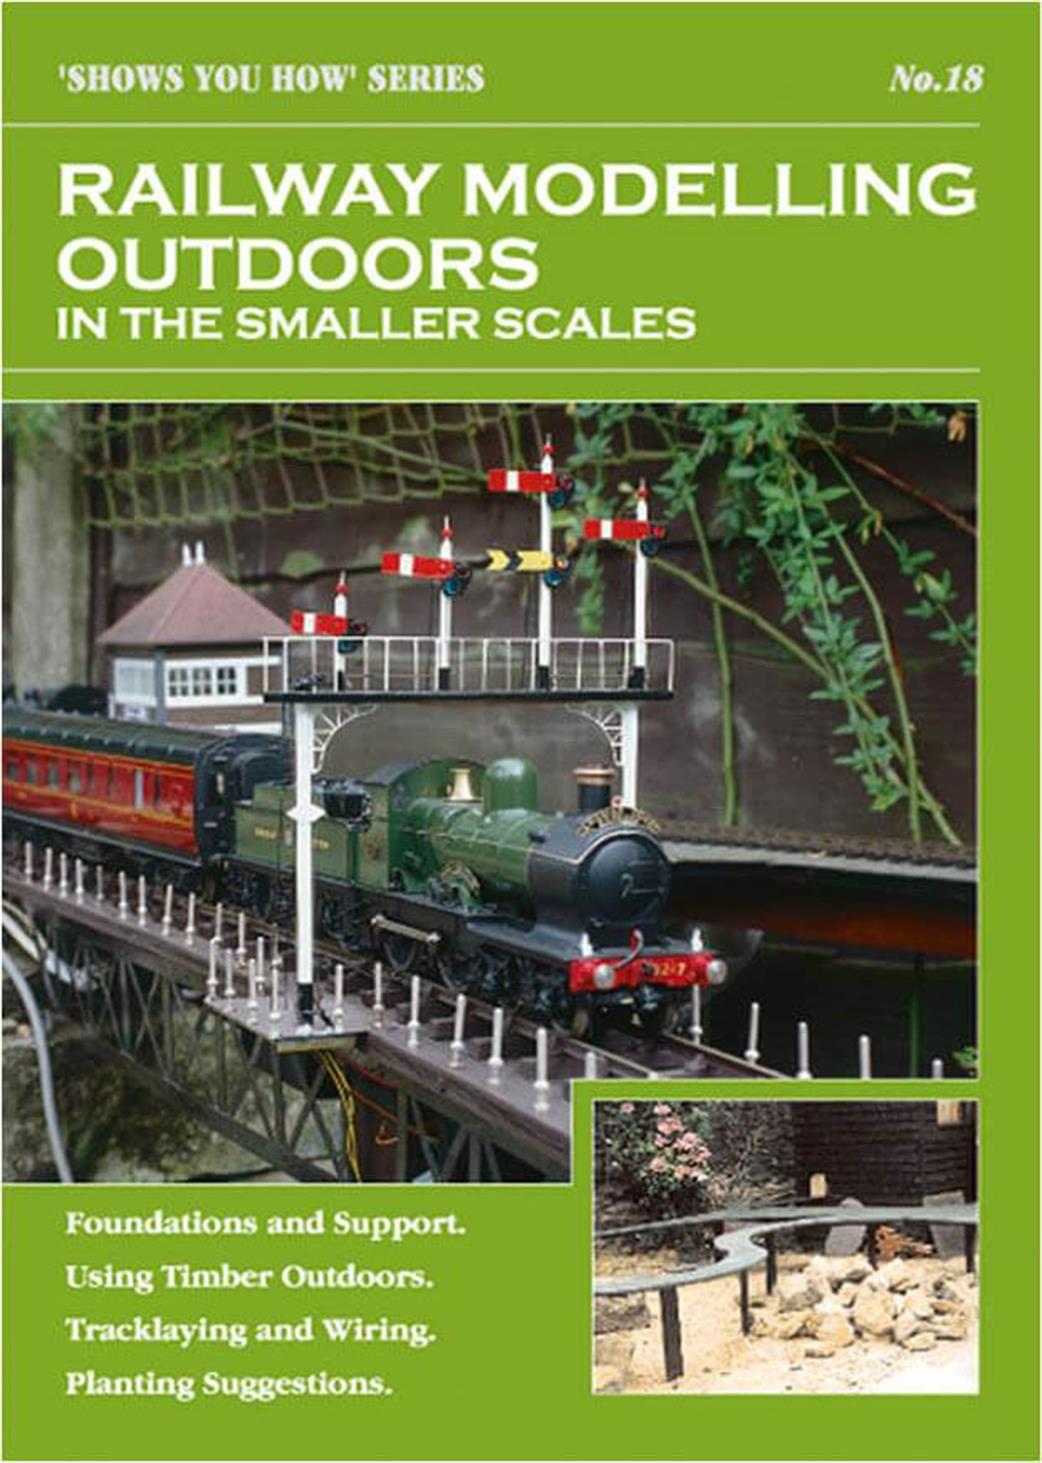 Peco  SYH 18 Show You How 18 Railway Modelling Outdoors in the Smaller Scales